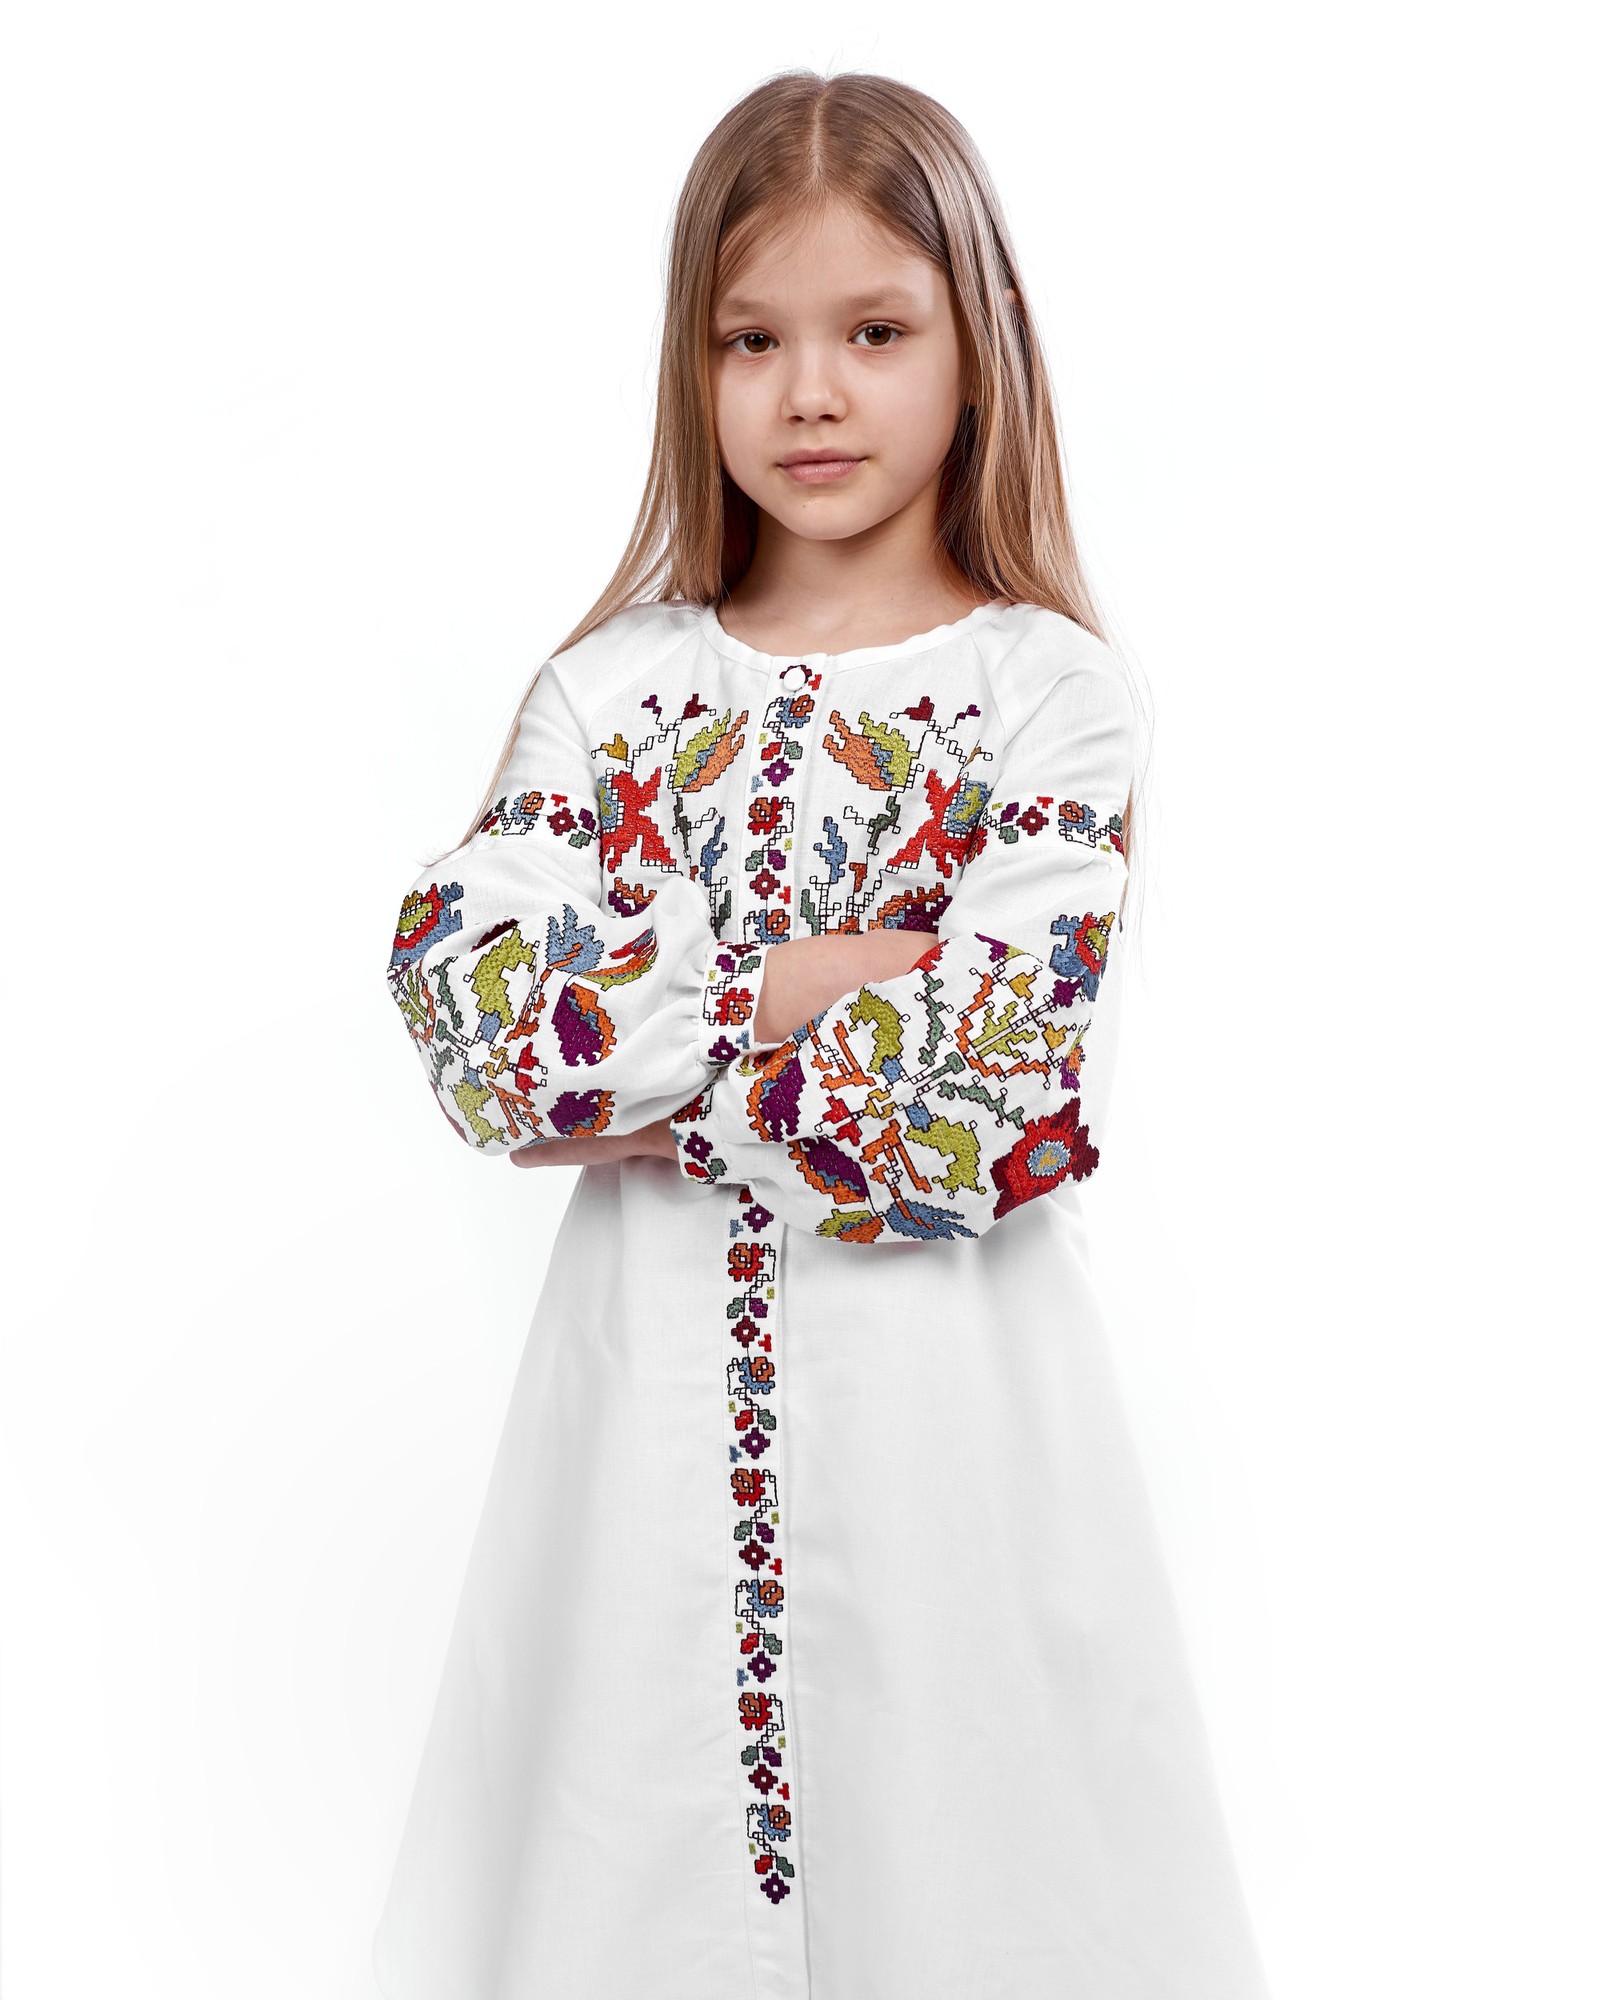 Embroidered dress for girls 302-20/09